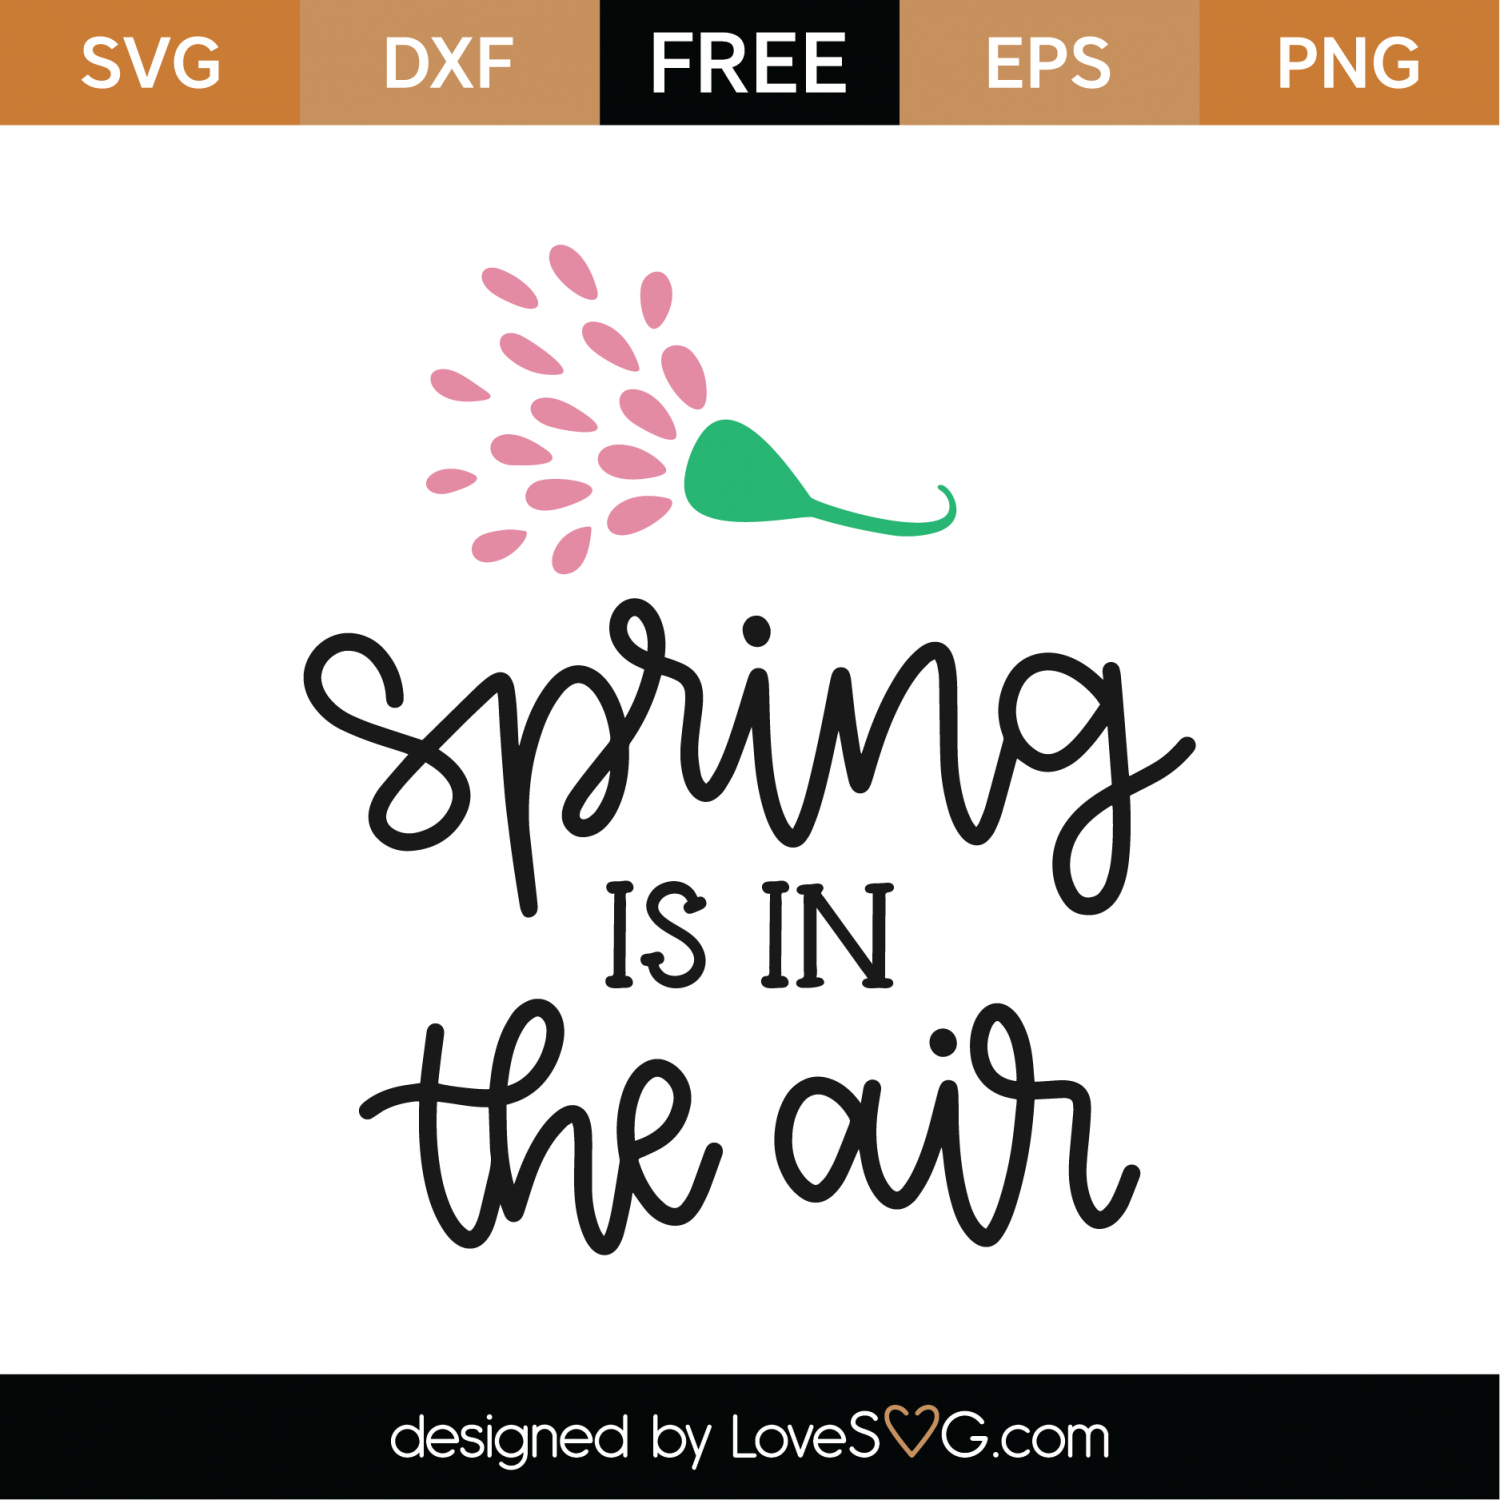 Download Free Spring Is In Air SVG Cut File | Lovesvg.com